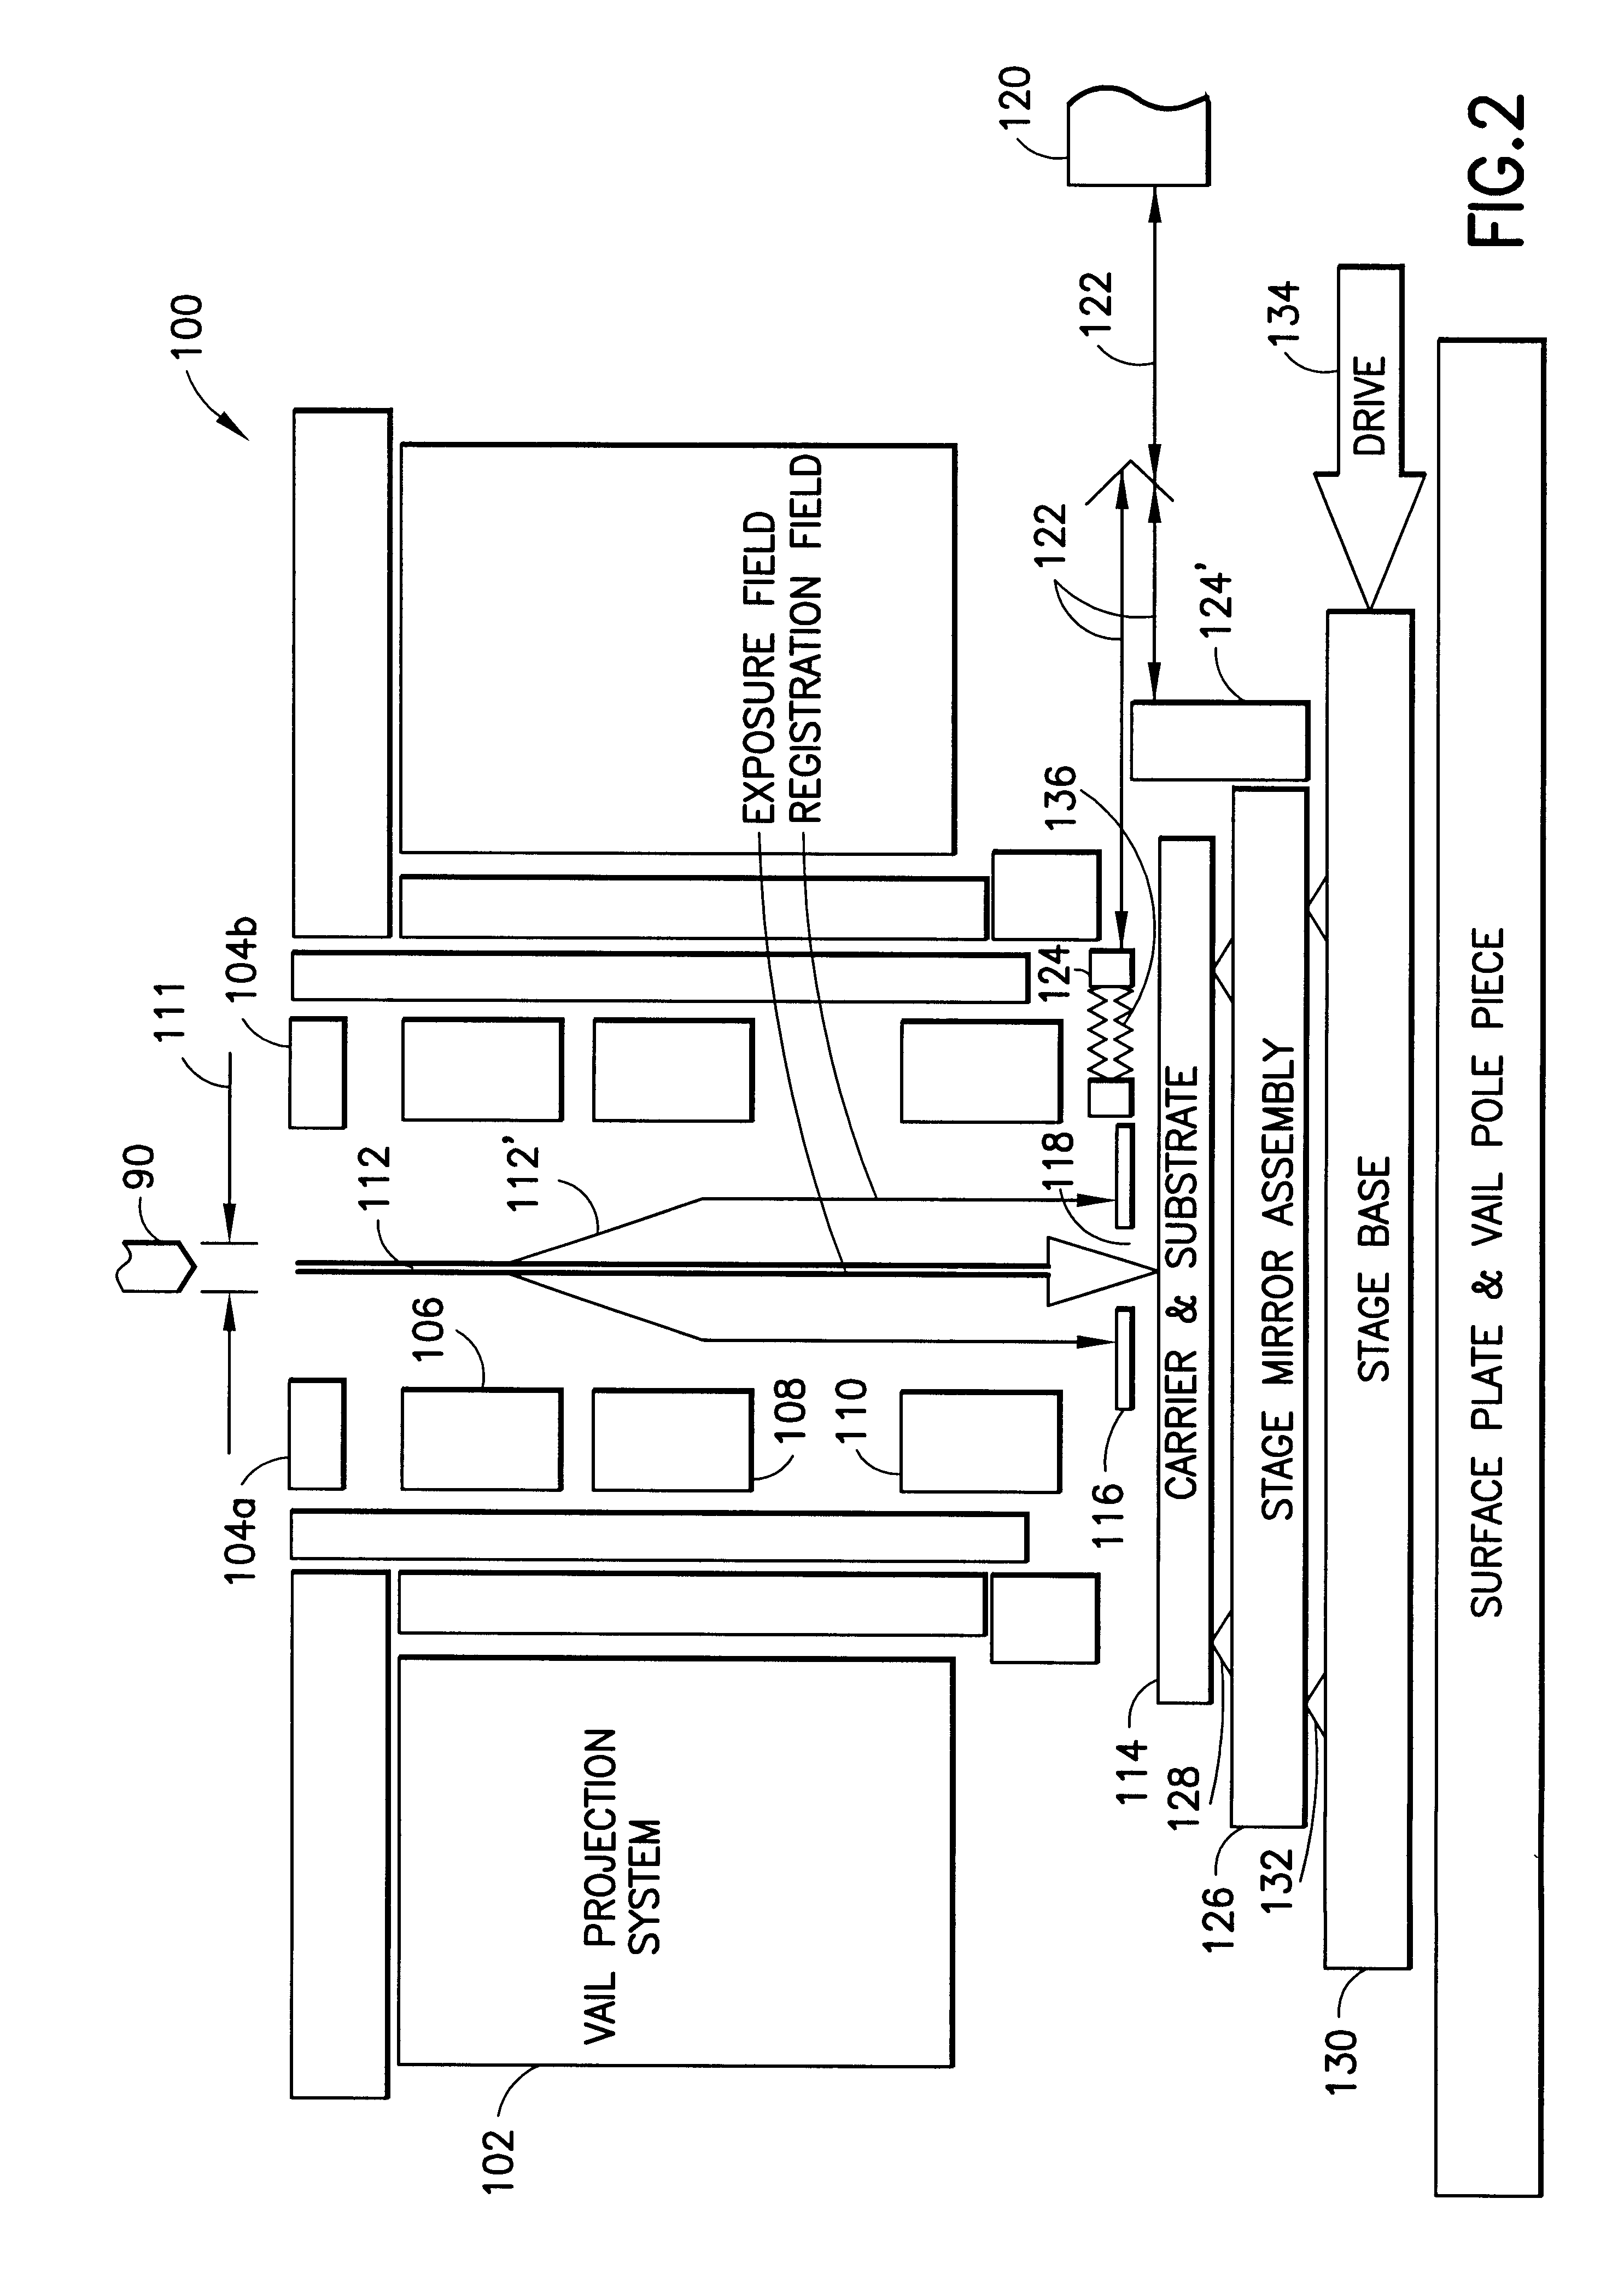 Target locking system for electron beam lithography